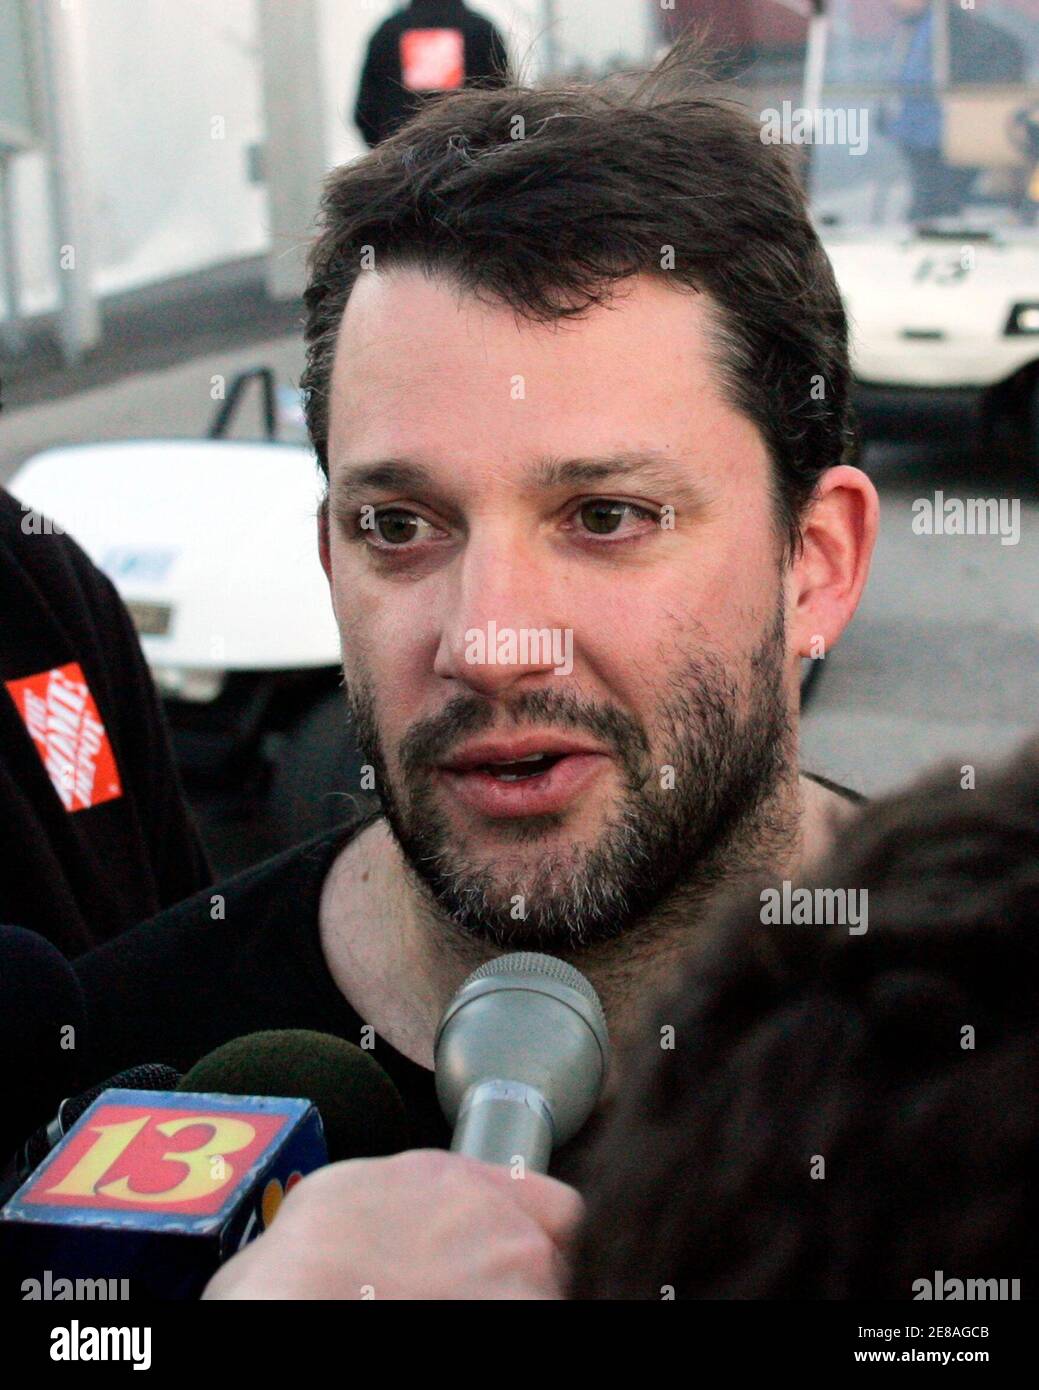 Driver Tony Stewart speaks to the media at a care center following a crash during the 49th Daytona 500 NASCAR Nextel Series race at the Daytona International Speedway in Daytona Beach, Florida February 18, 2007.   REUTERS/Rick Fowler (UNITED STATES) Stock Photo